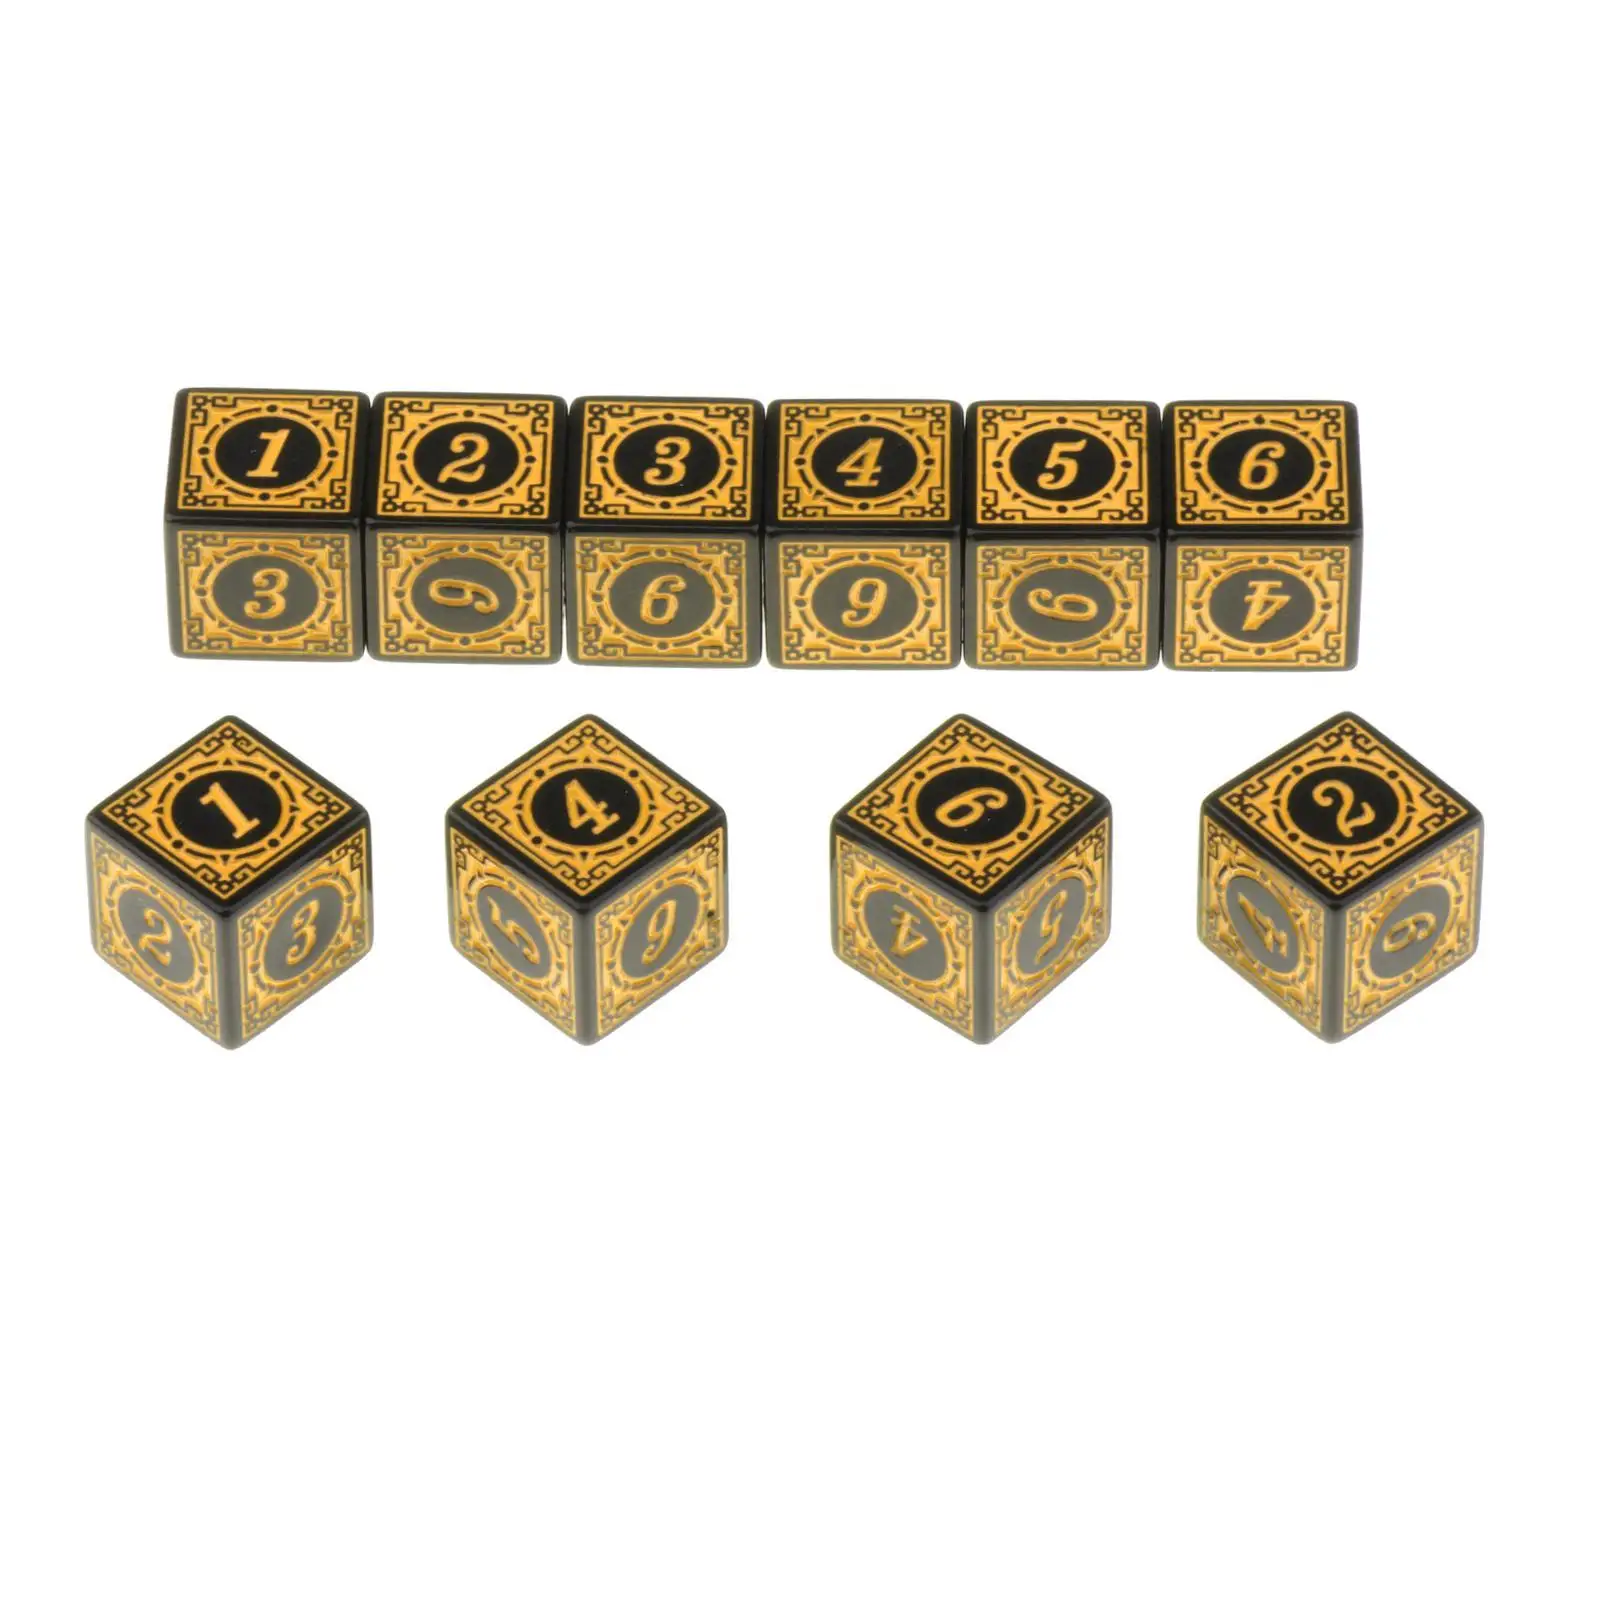 Dice Game Entertainment Dice Tabletop Playing Game for Table Board Game